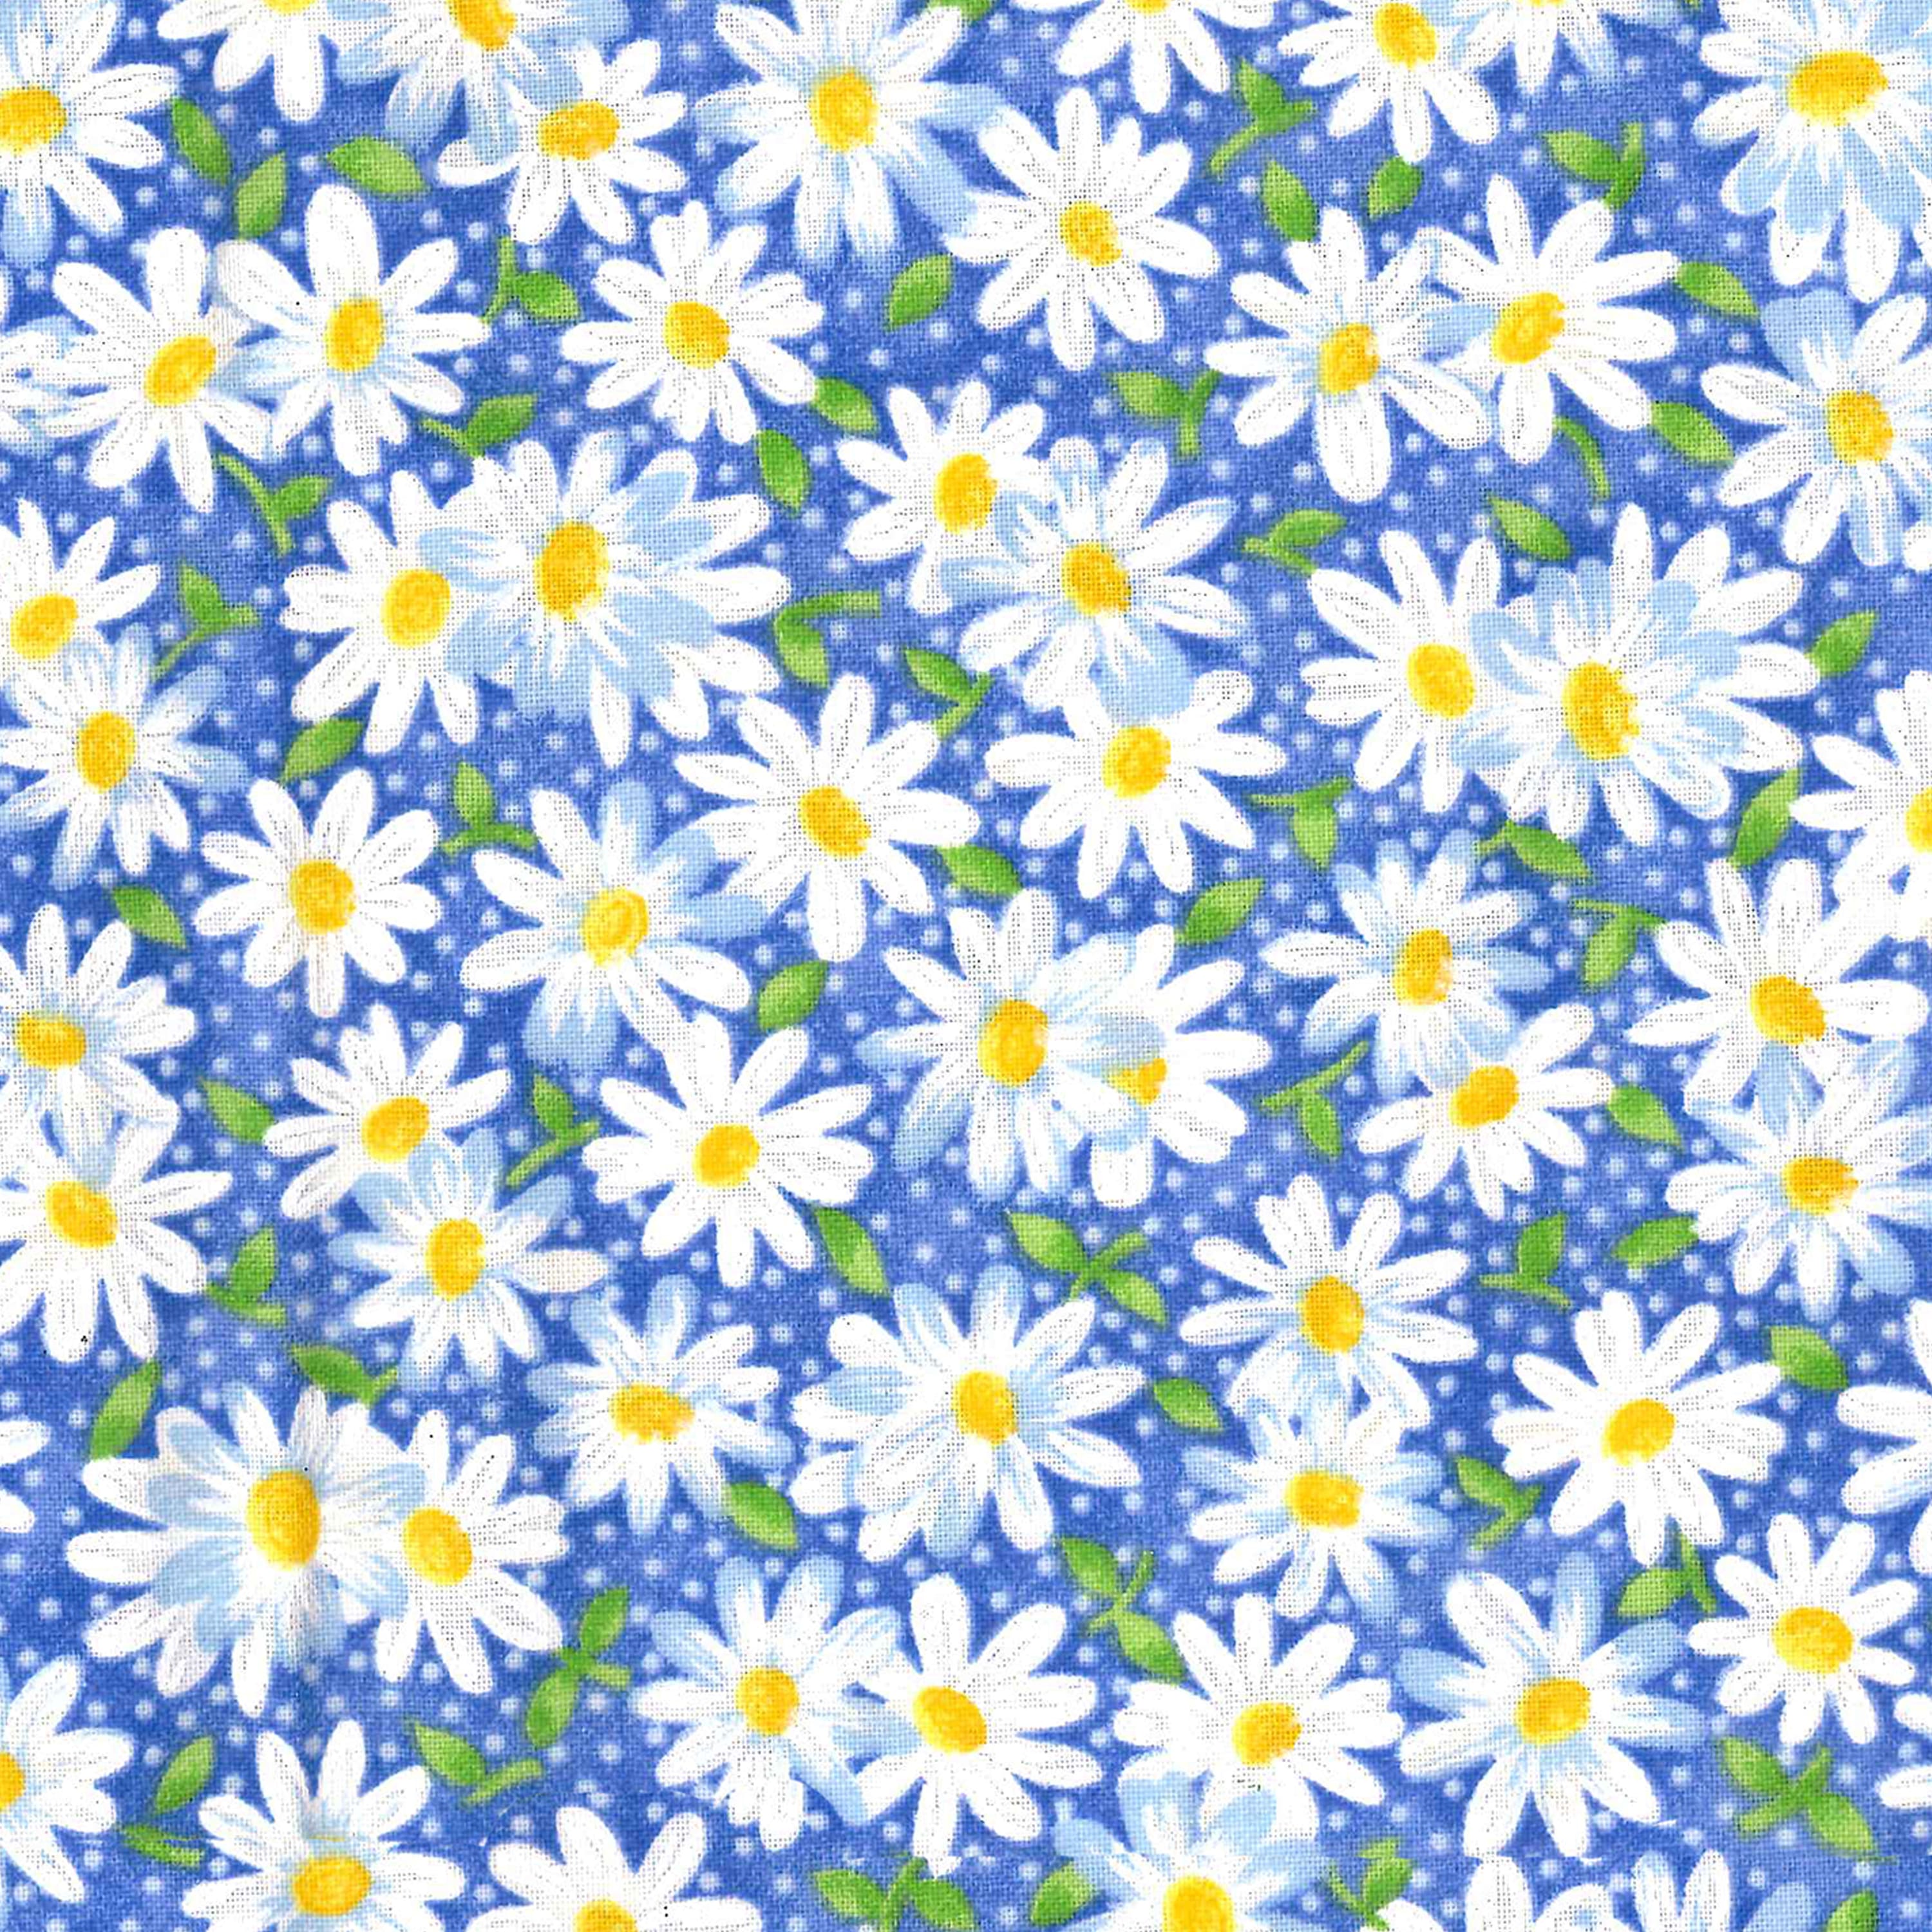 Fabric Traditions White Packed Daisies Cotton Fabric